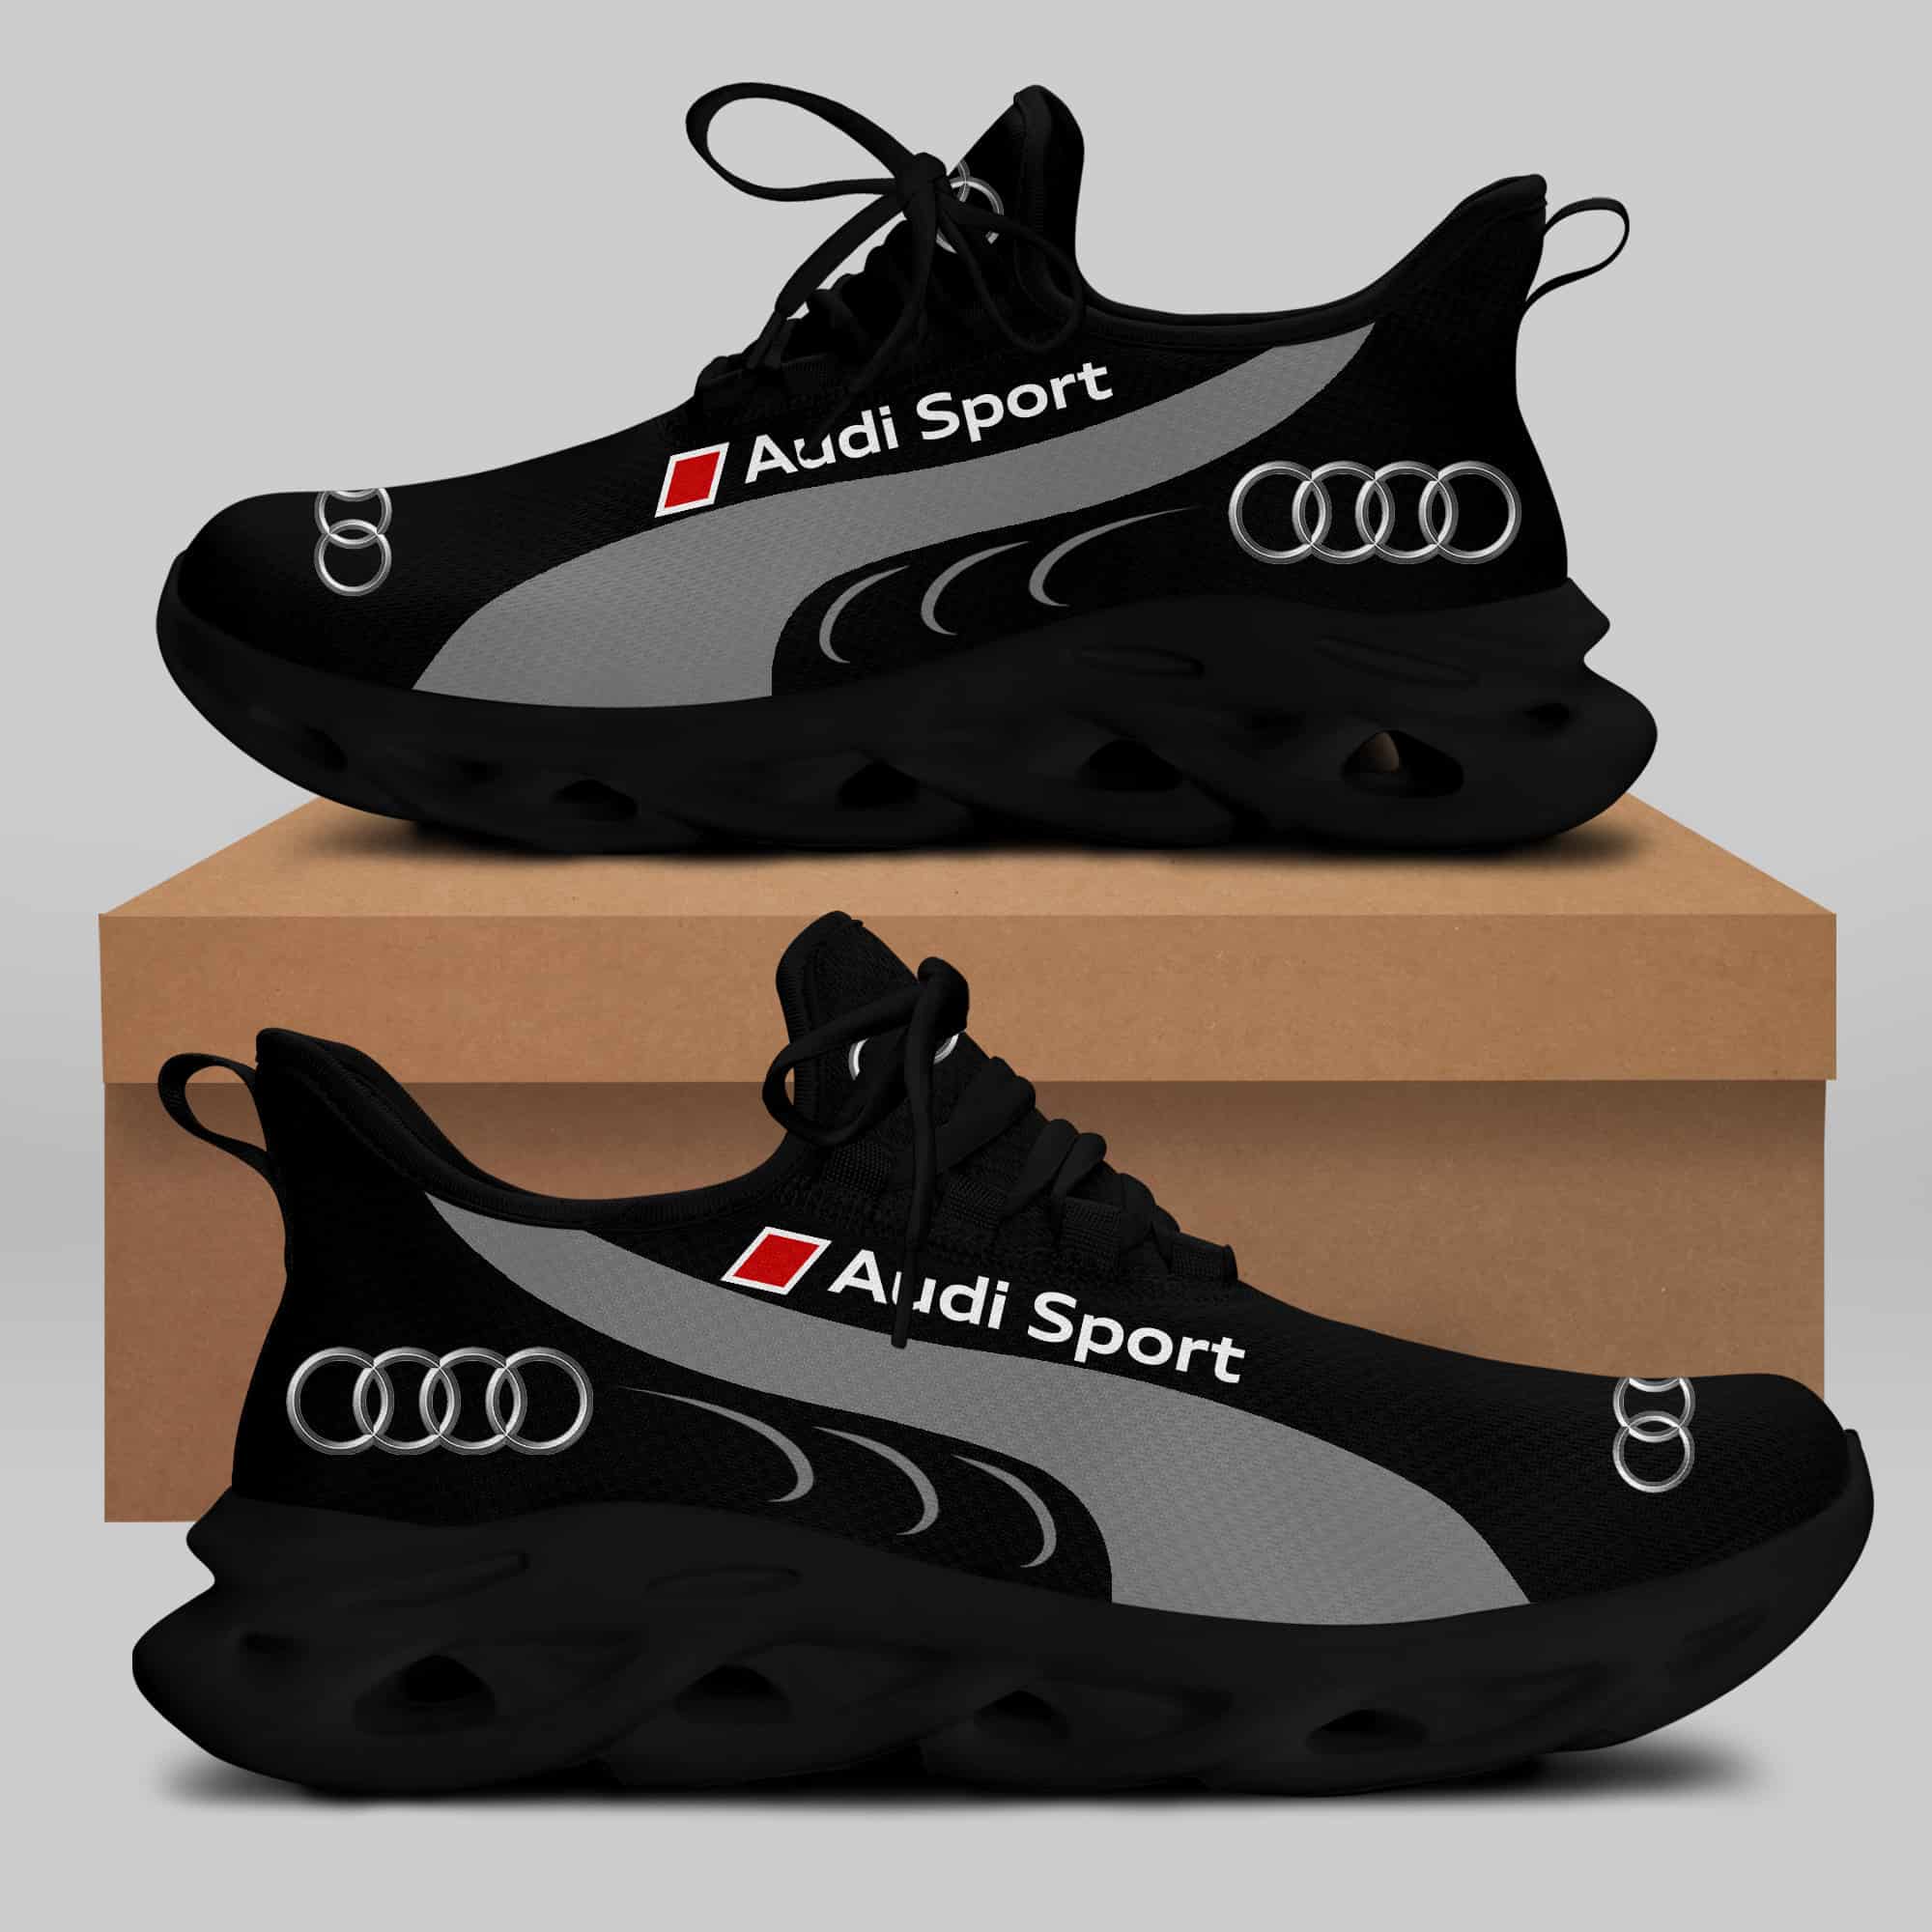 Audi Sport Running Shoes Max Soul Shoes Sneakers Ver 29 1